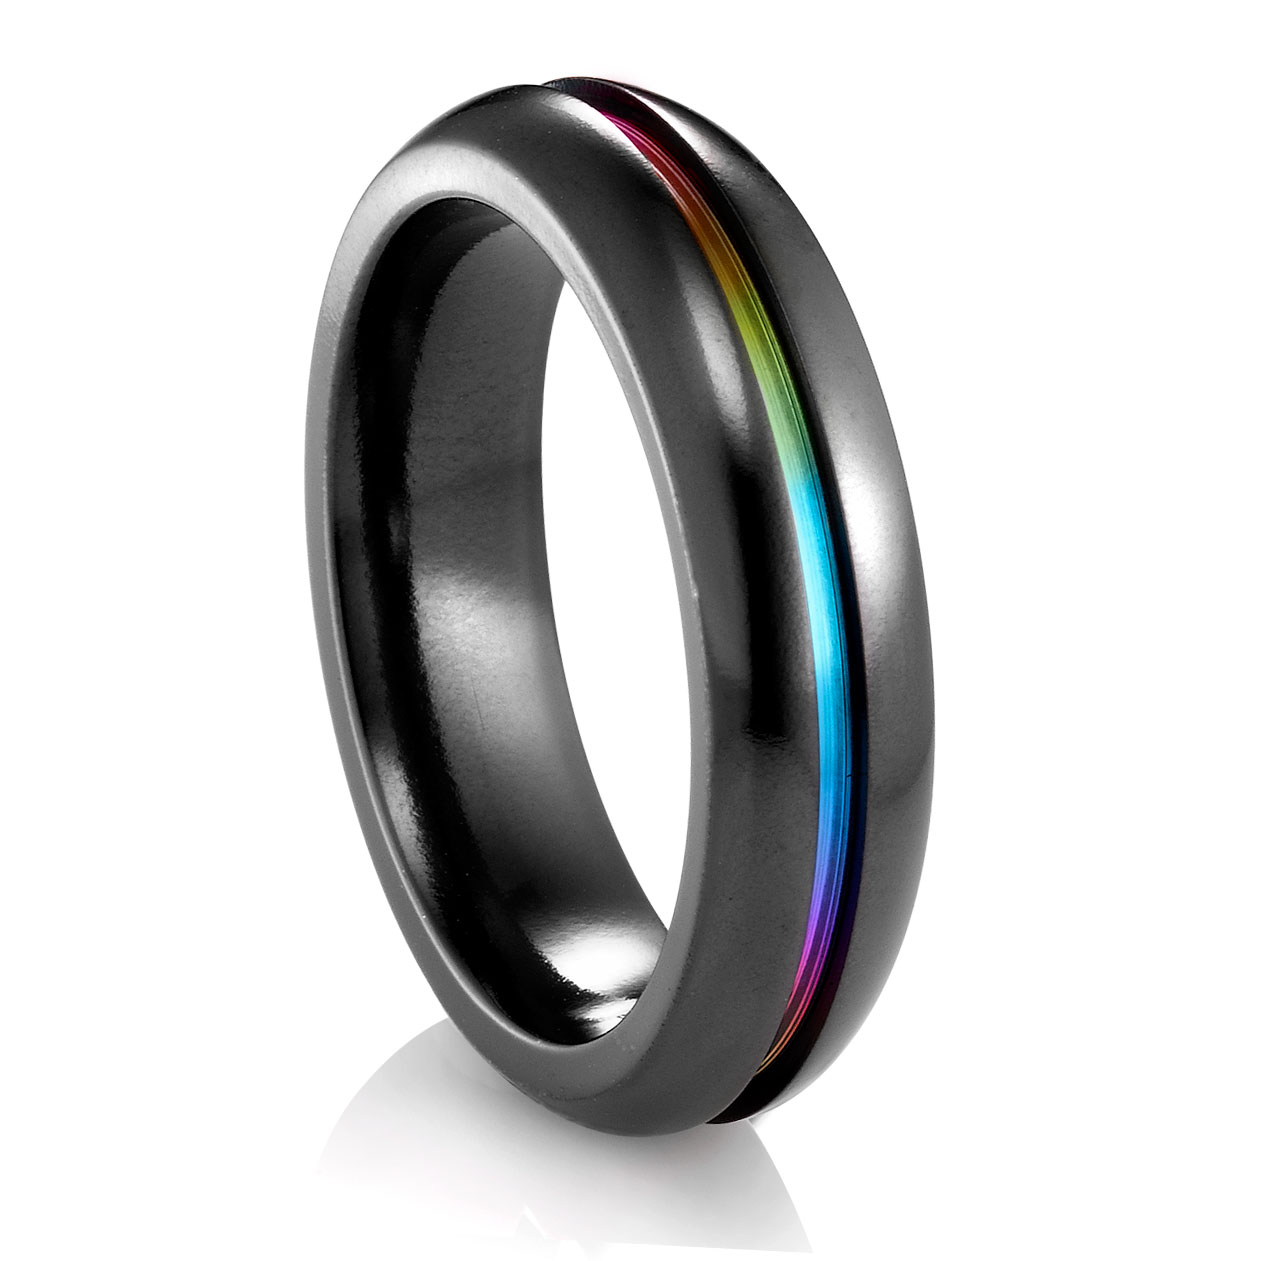 Roy Rose Jewelry Edward Mirell Jewelry Collection Black Titanium Multi-Colored Anodized 7mm Band Ring Size 7